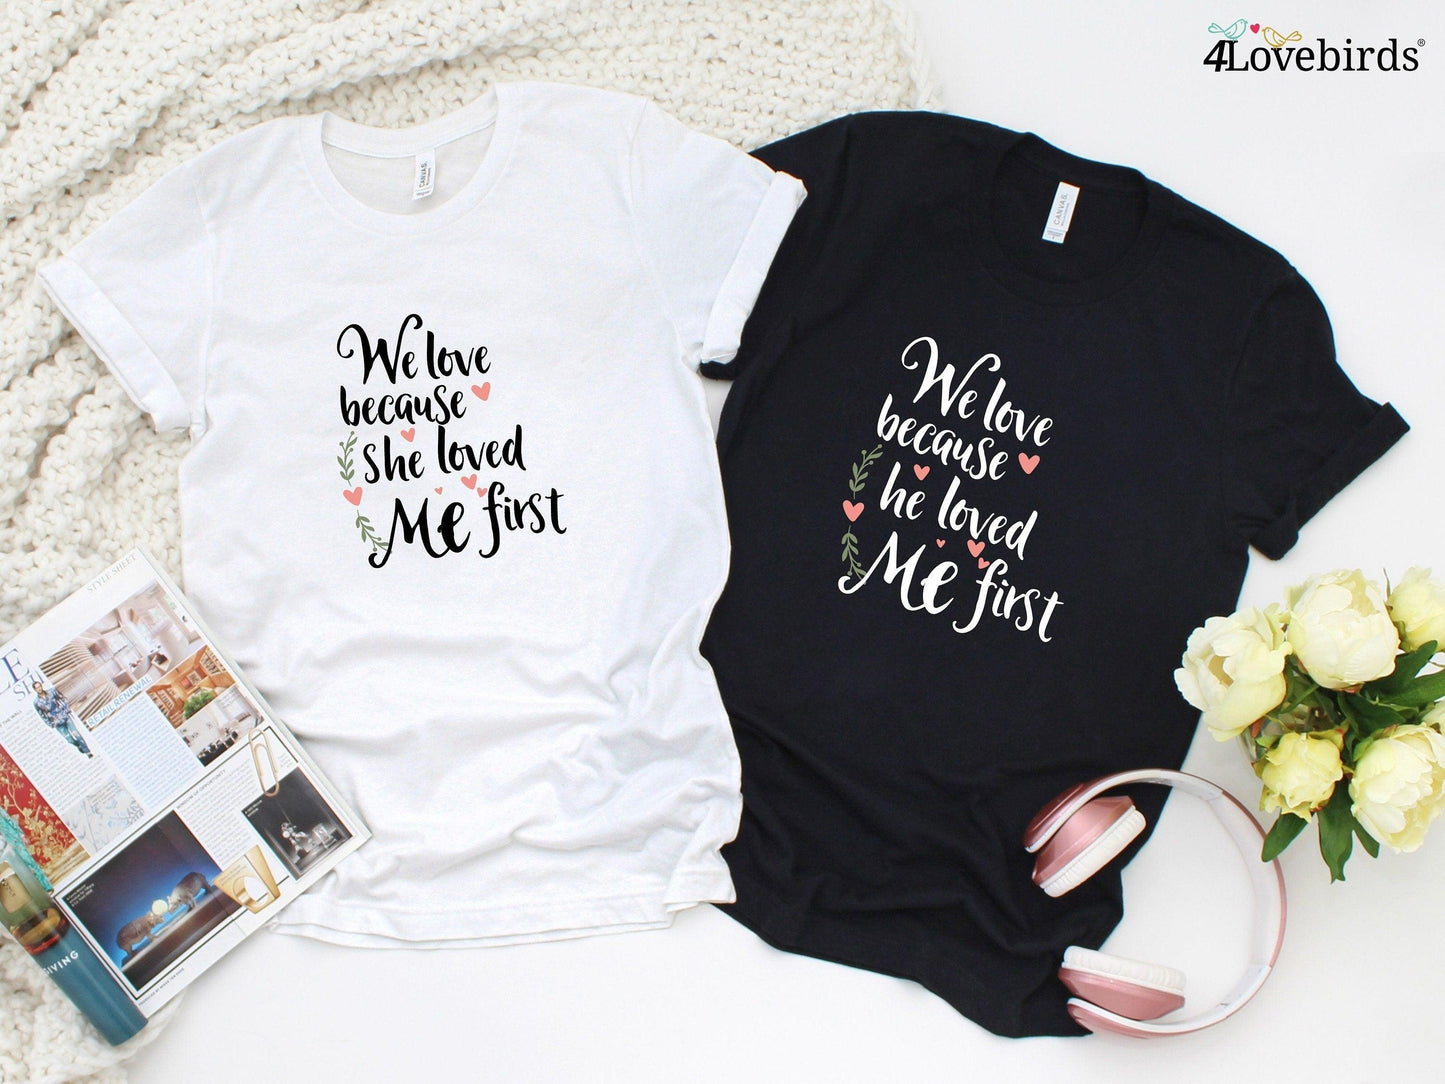 We love because he/she loved me first Hoodie, Lovers matching T-shirt, Gift for Couples, Valentine Sweatshirt, Cute Tshirt, Gift for Maried - 4Lovebirds